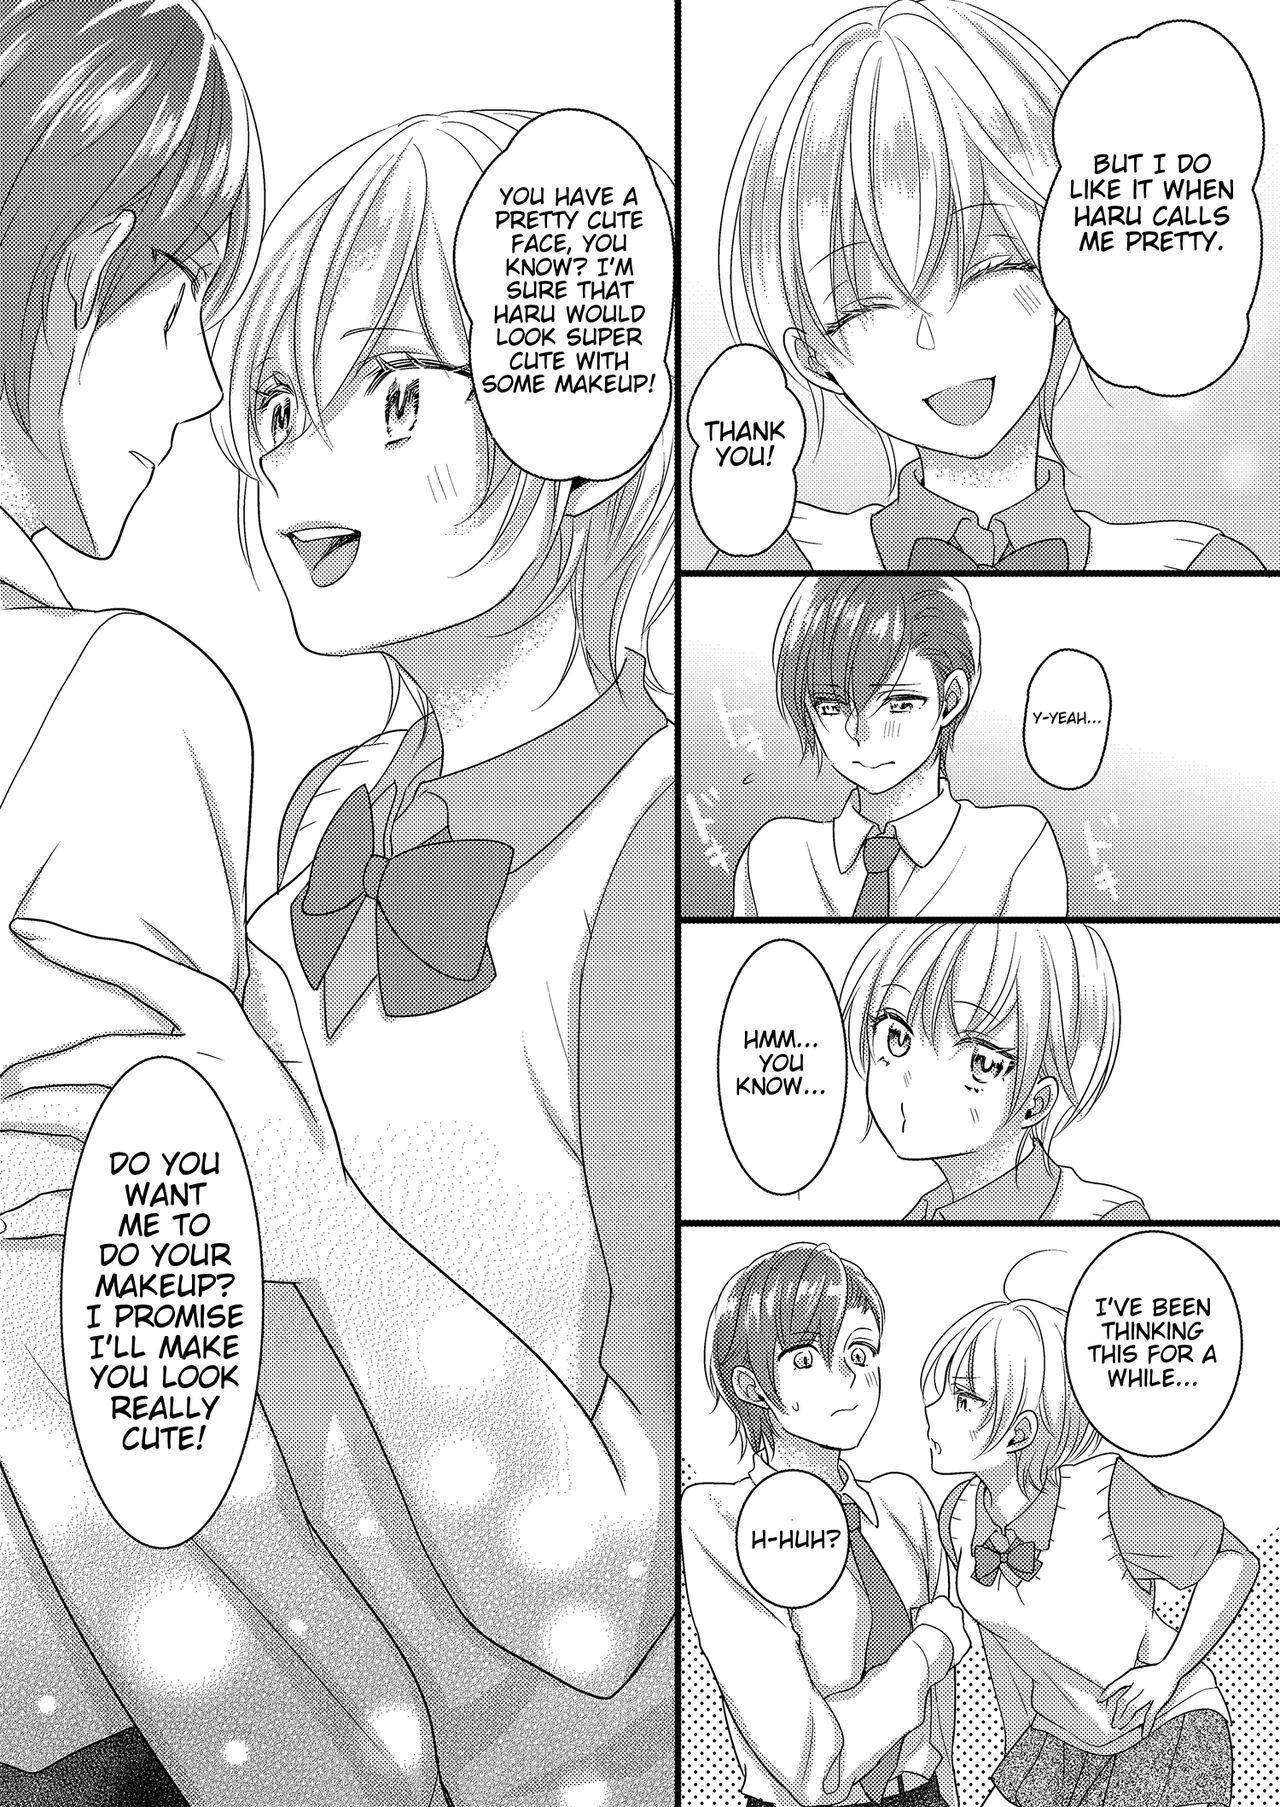 Buttplug Haru and Sana ～Love Connected Through Cosplay～ - Original Cum Swallow - Page 7